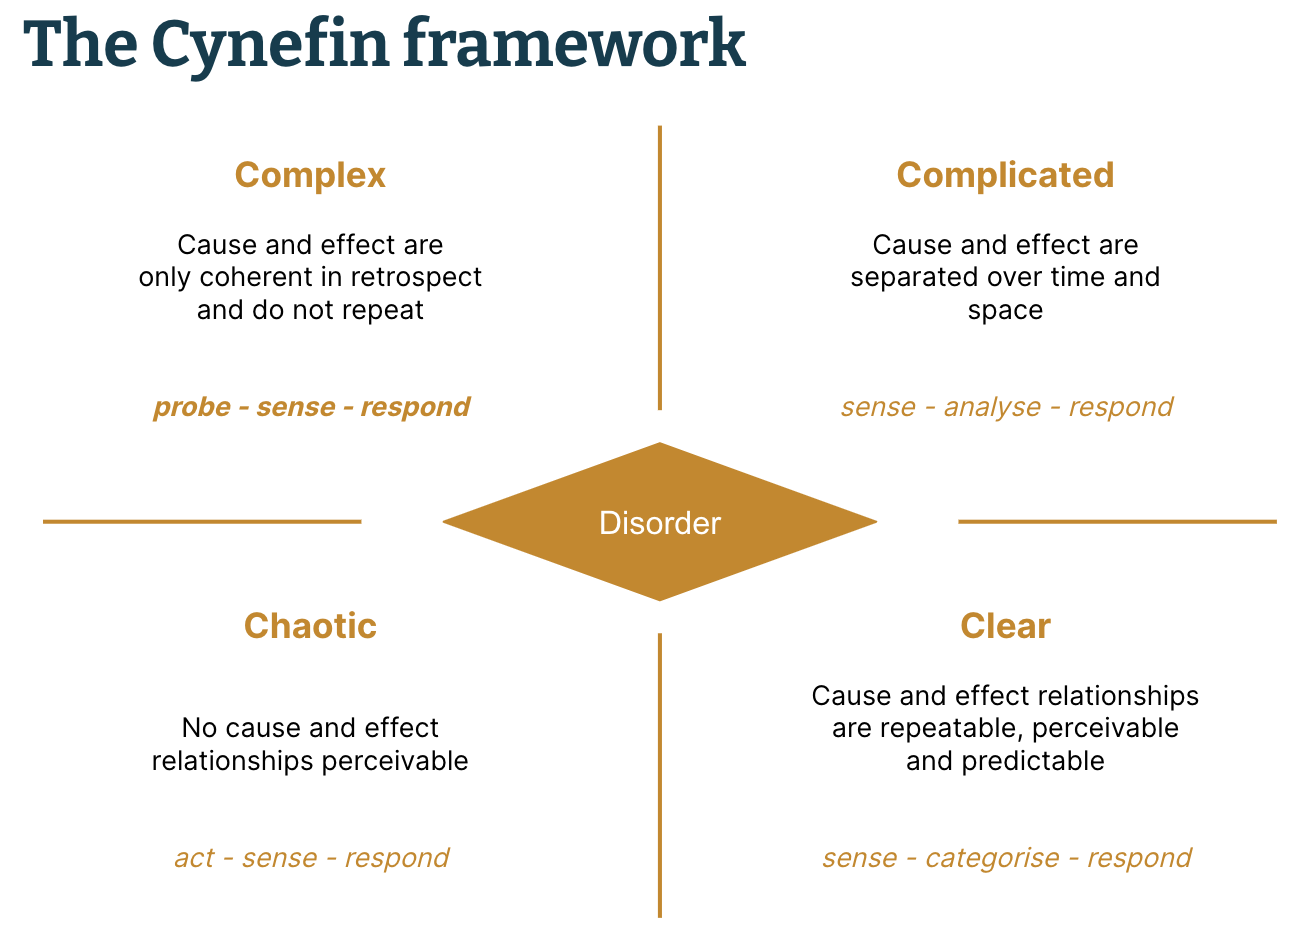 Diagram showing the Cynefin Framework and describing the five domains of clear, complicated, complex, chaotic and disordered.